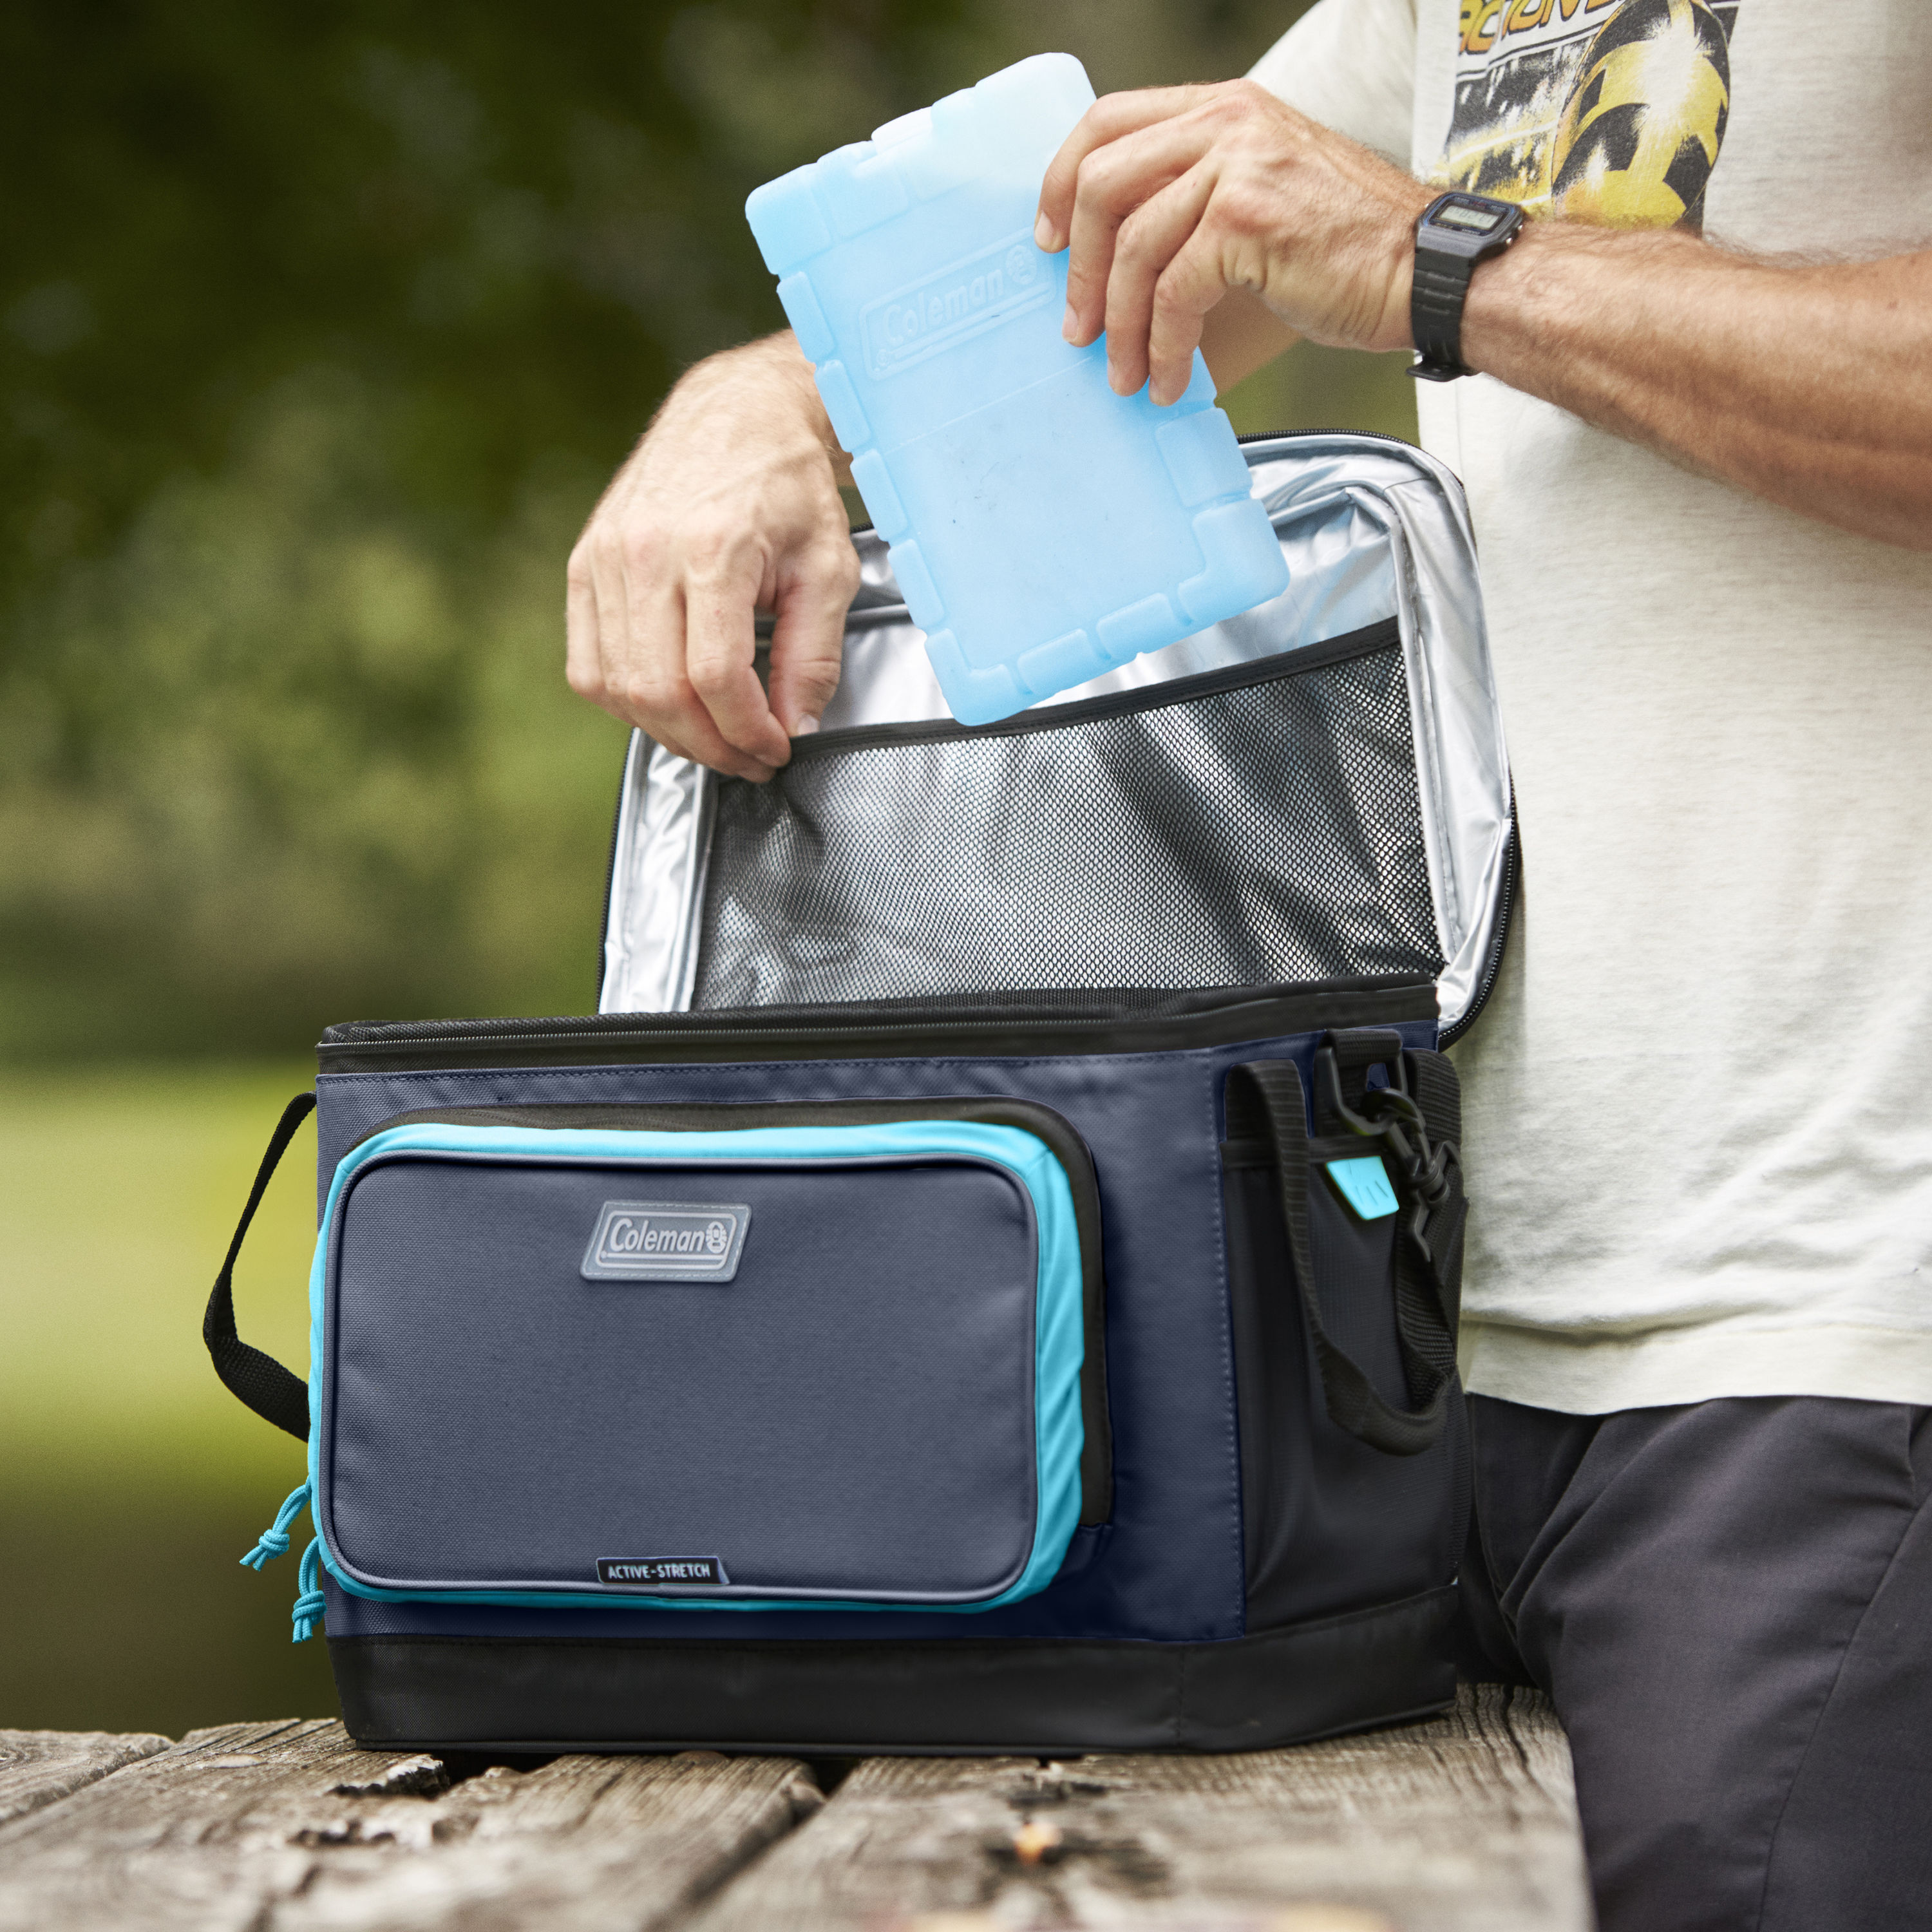 Coleman Xpand Blue Nights Insulated Bag Cooler at Lowes.com